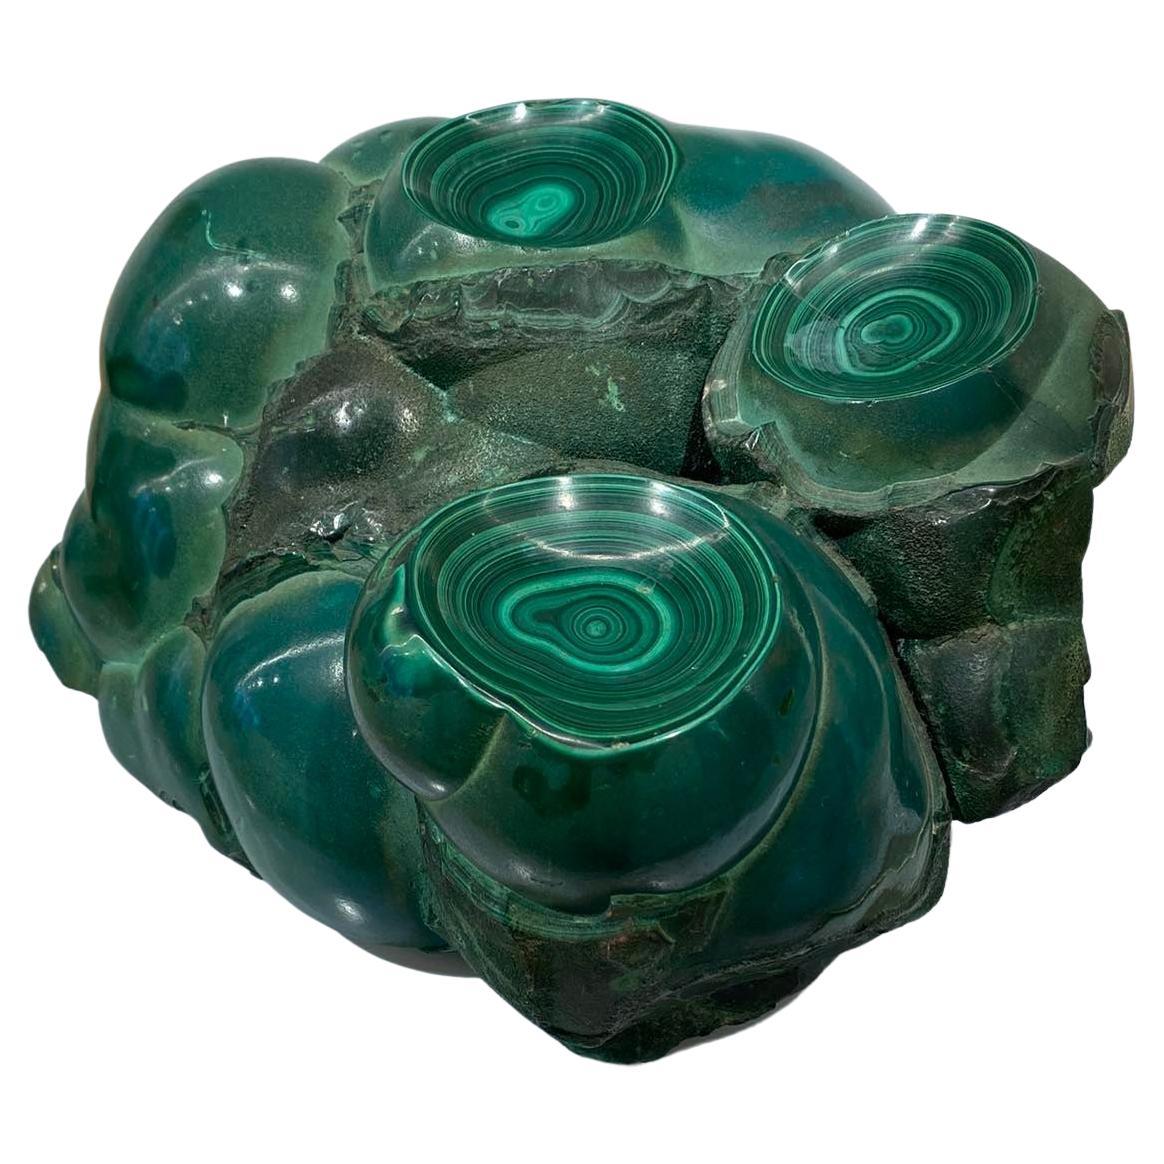  Malachite Monobloc Weight 22.3 Kg - From DR Congo - Perfect condition Zaire For Sale